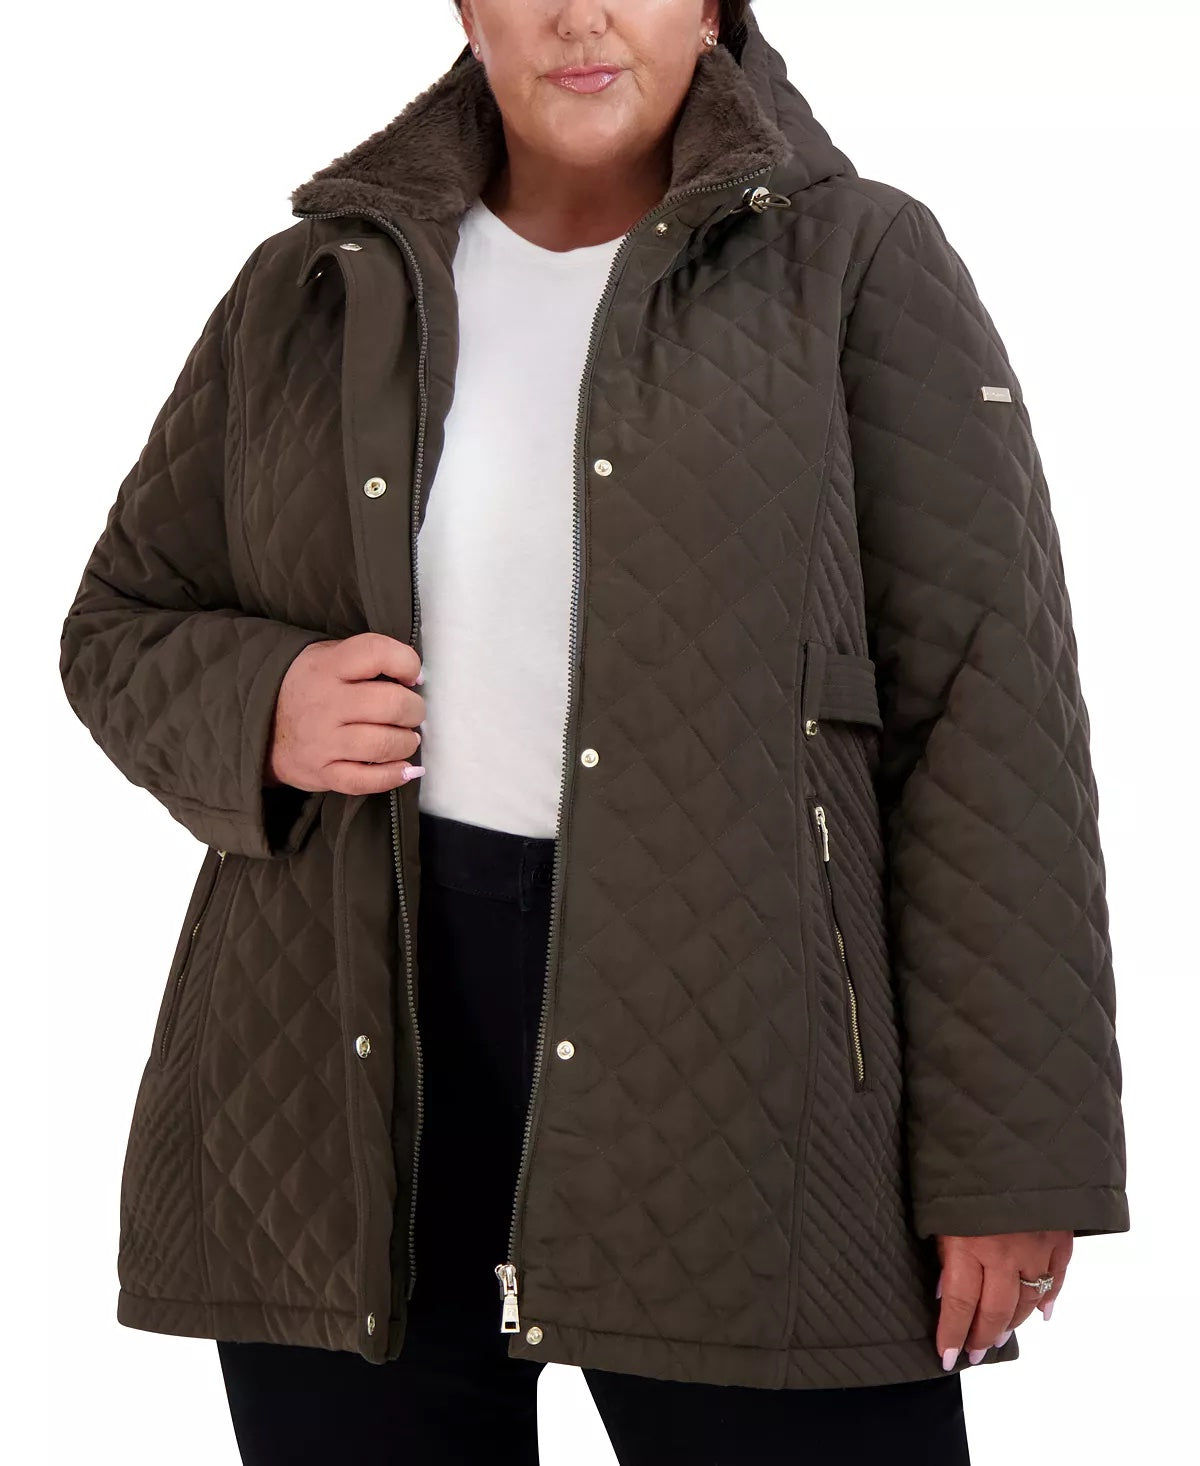 Laundry by Shelli Segal Women's Plus Size Hooded Quilted Coat 2X Rich Taupe